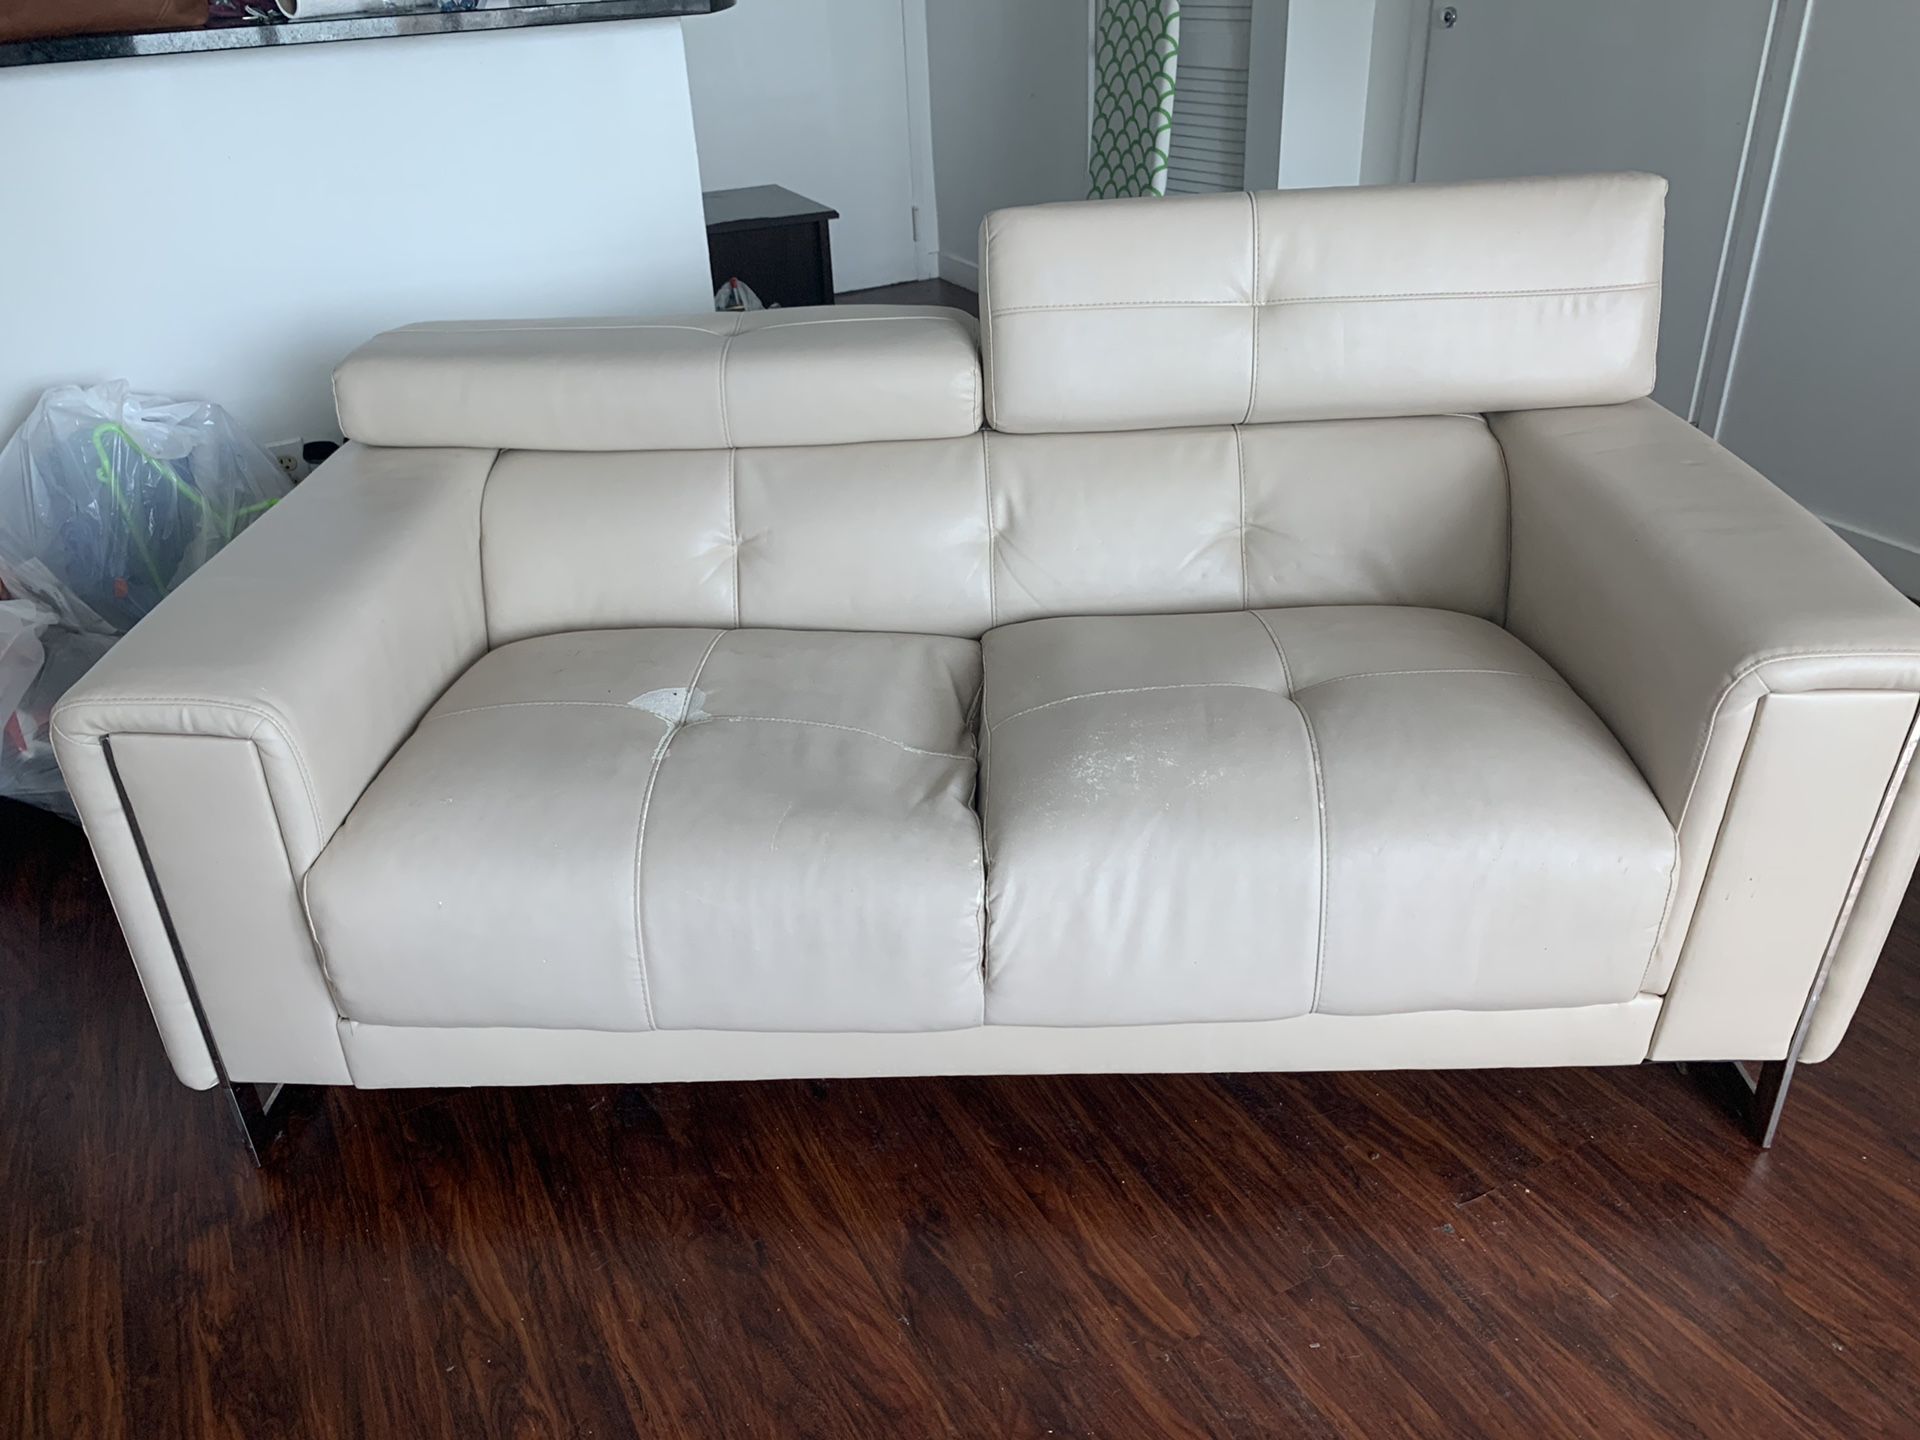 Beige 3 piece sofa / couch and chair set- amd misc furniture FREE!!!! MUST BE PICKED UP July 19 , 9-12